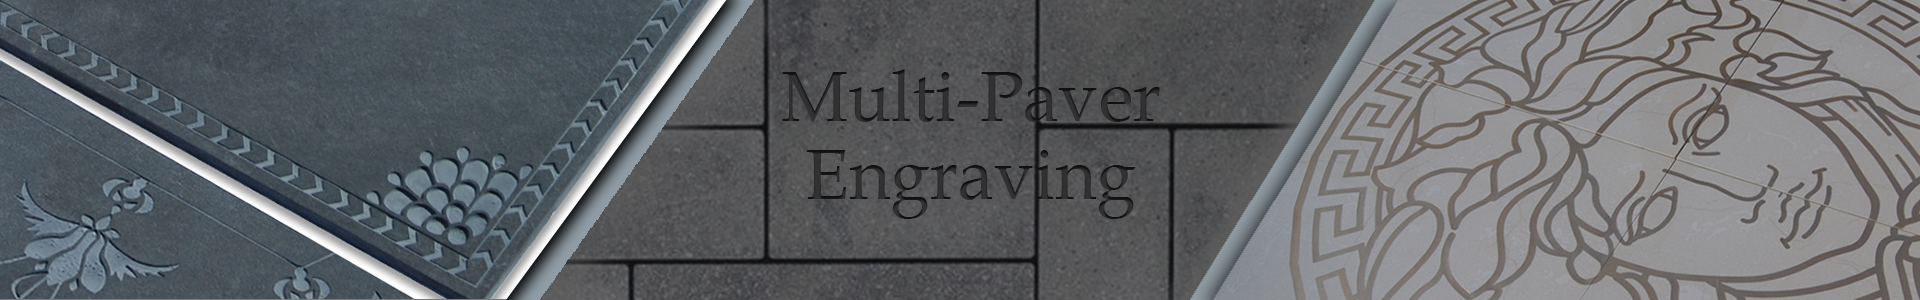 multi-paver_banner.png